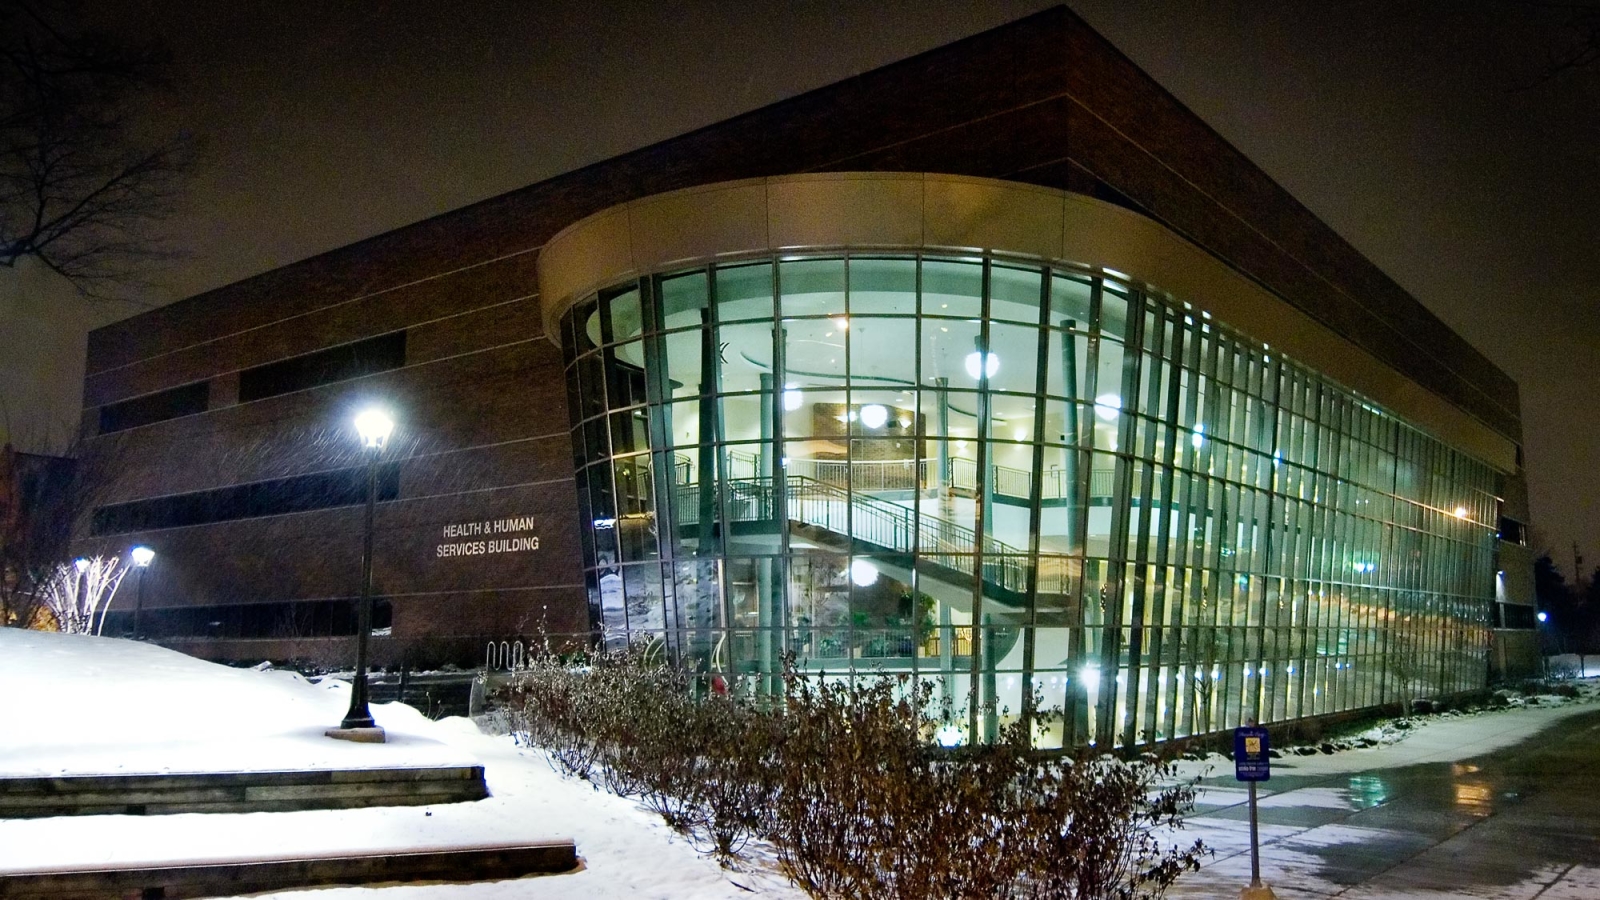 Exterior view of LCC's Health and Human Services building with lights inside, and dark outdoors.